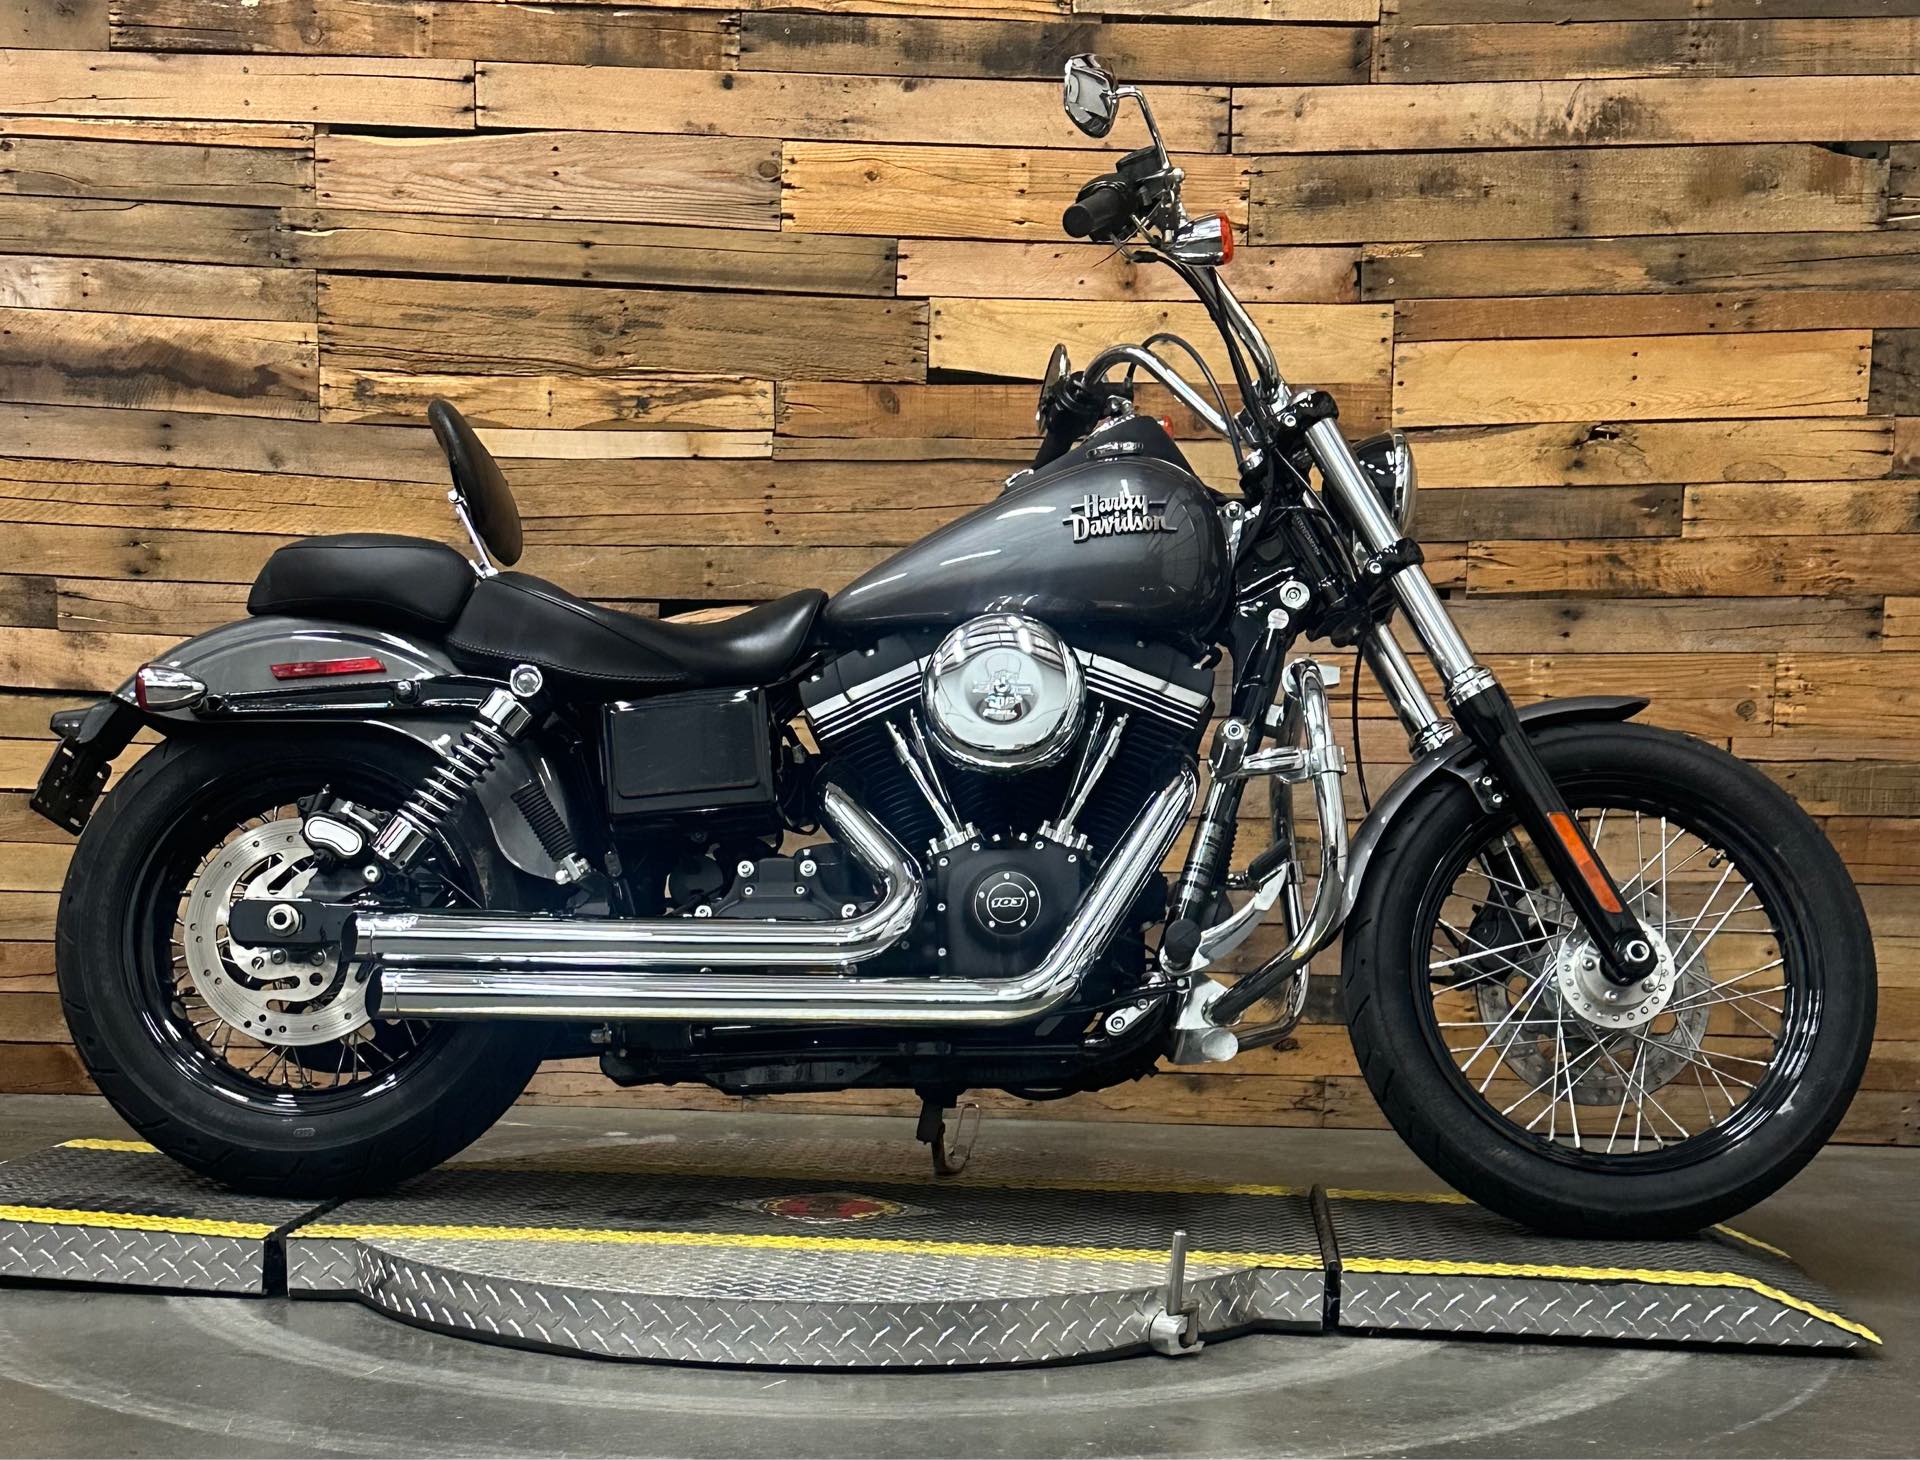 Our Harley-Davidson Dyna Inventory